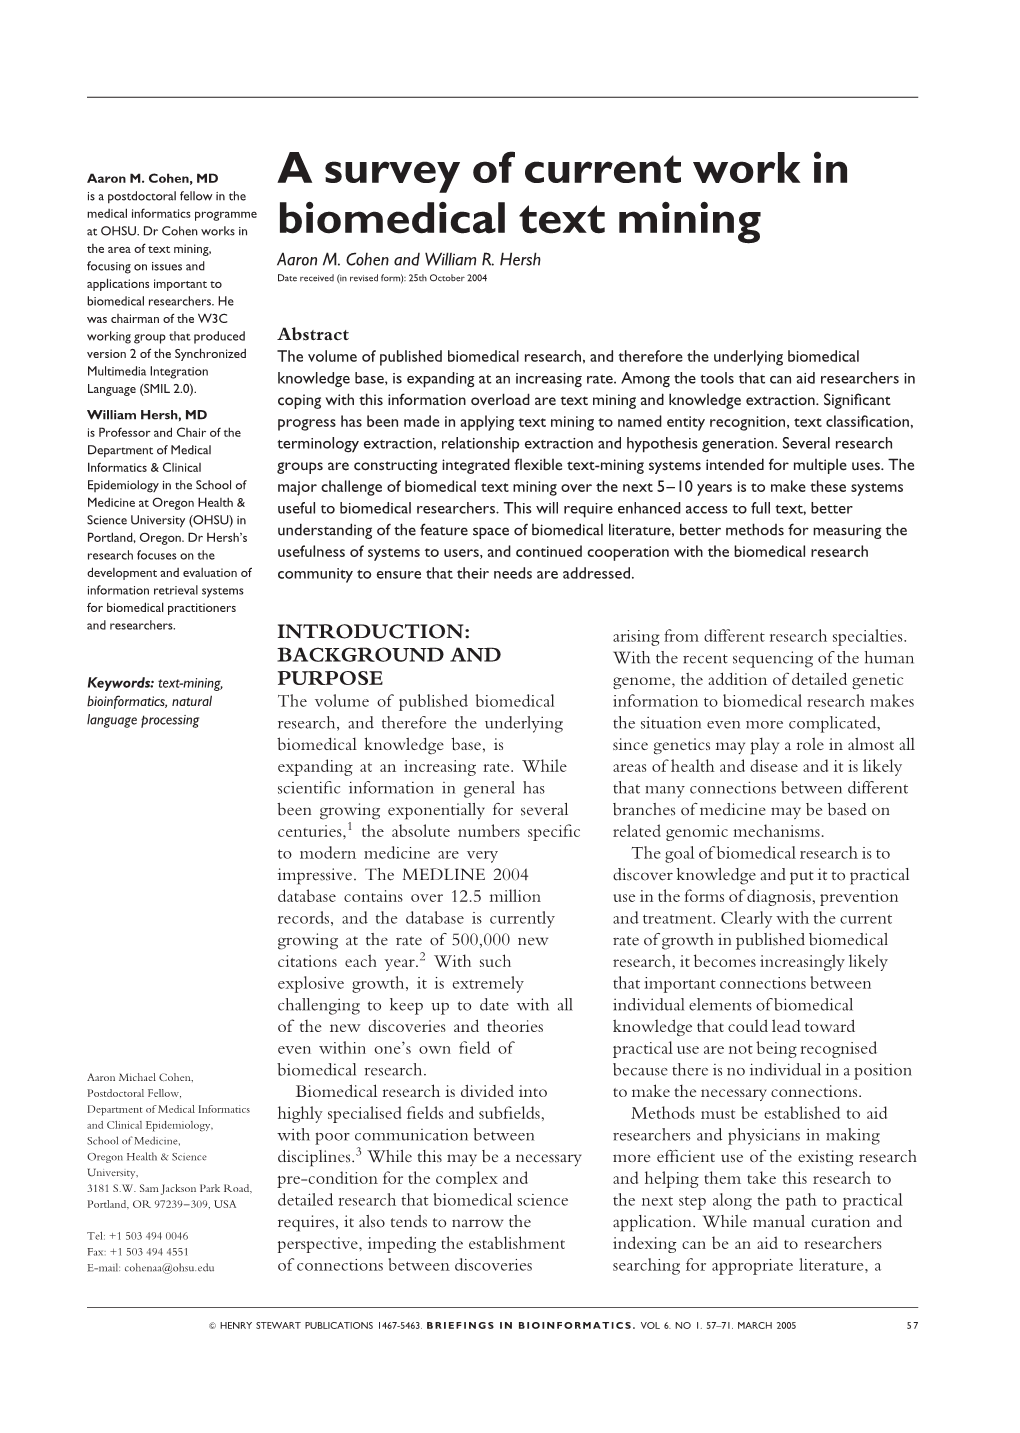 A Survey of Current Work in Biomedical Text Mining